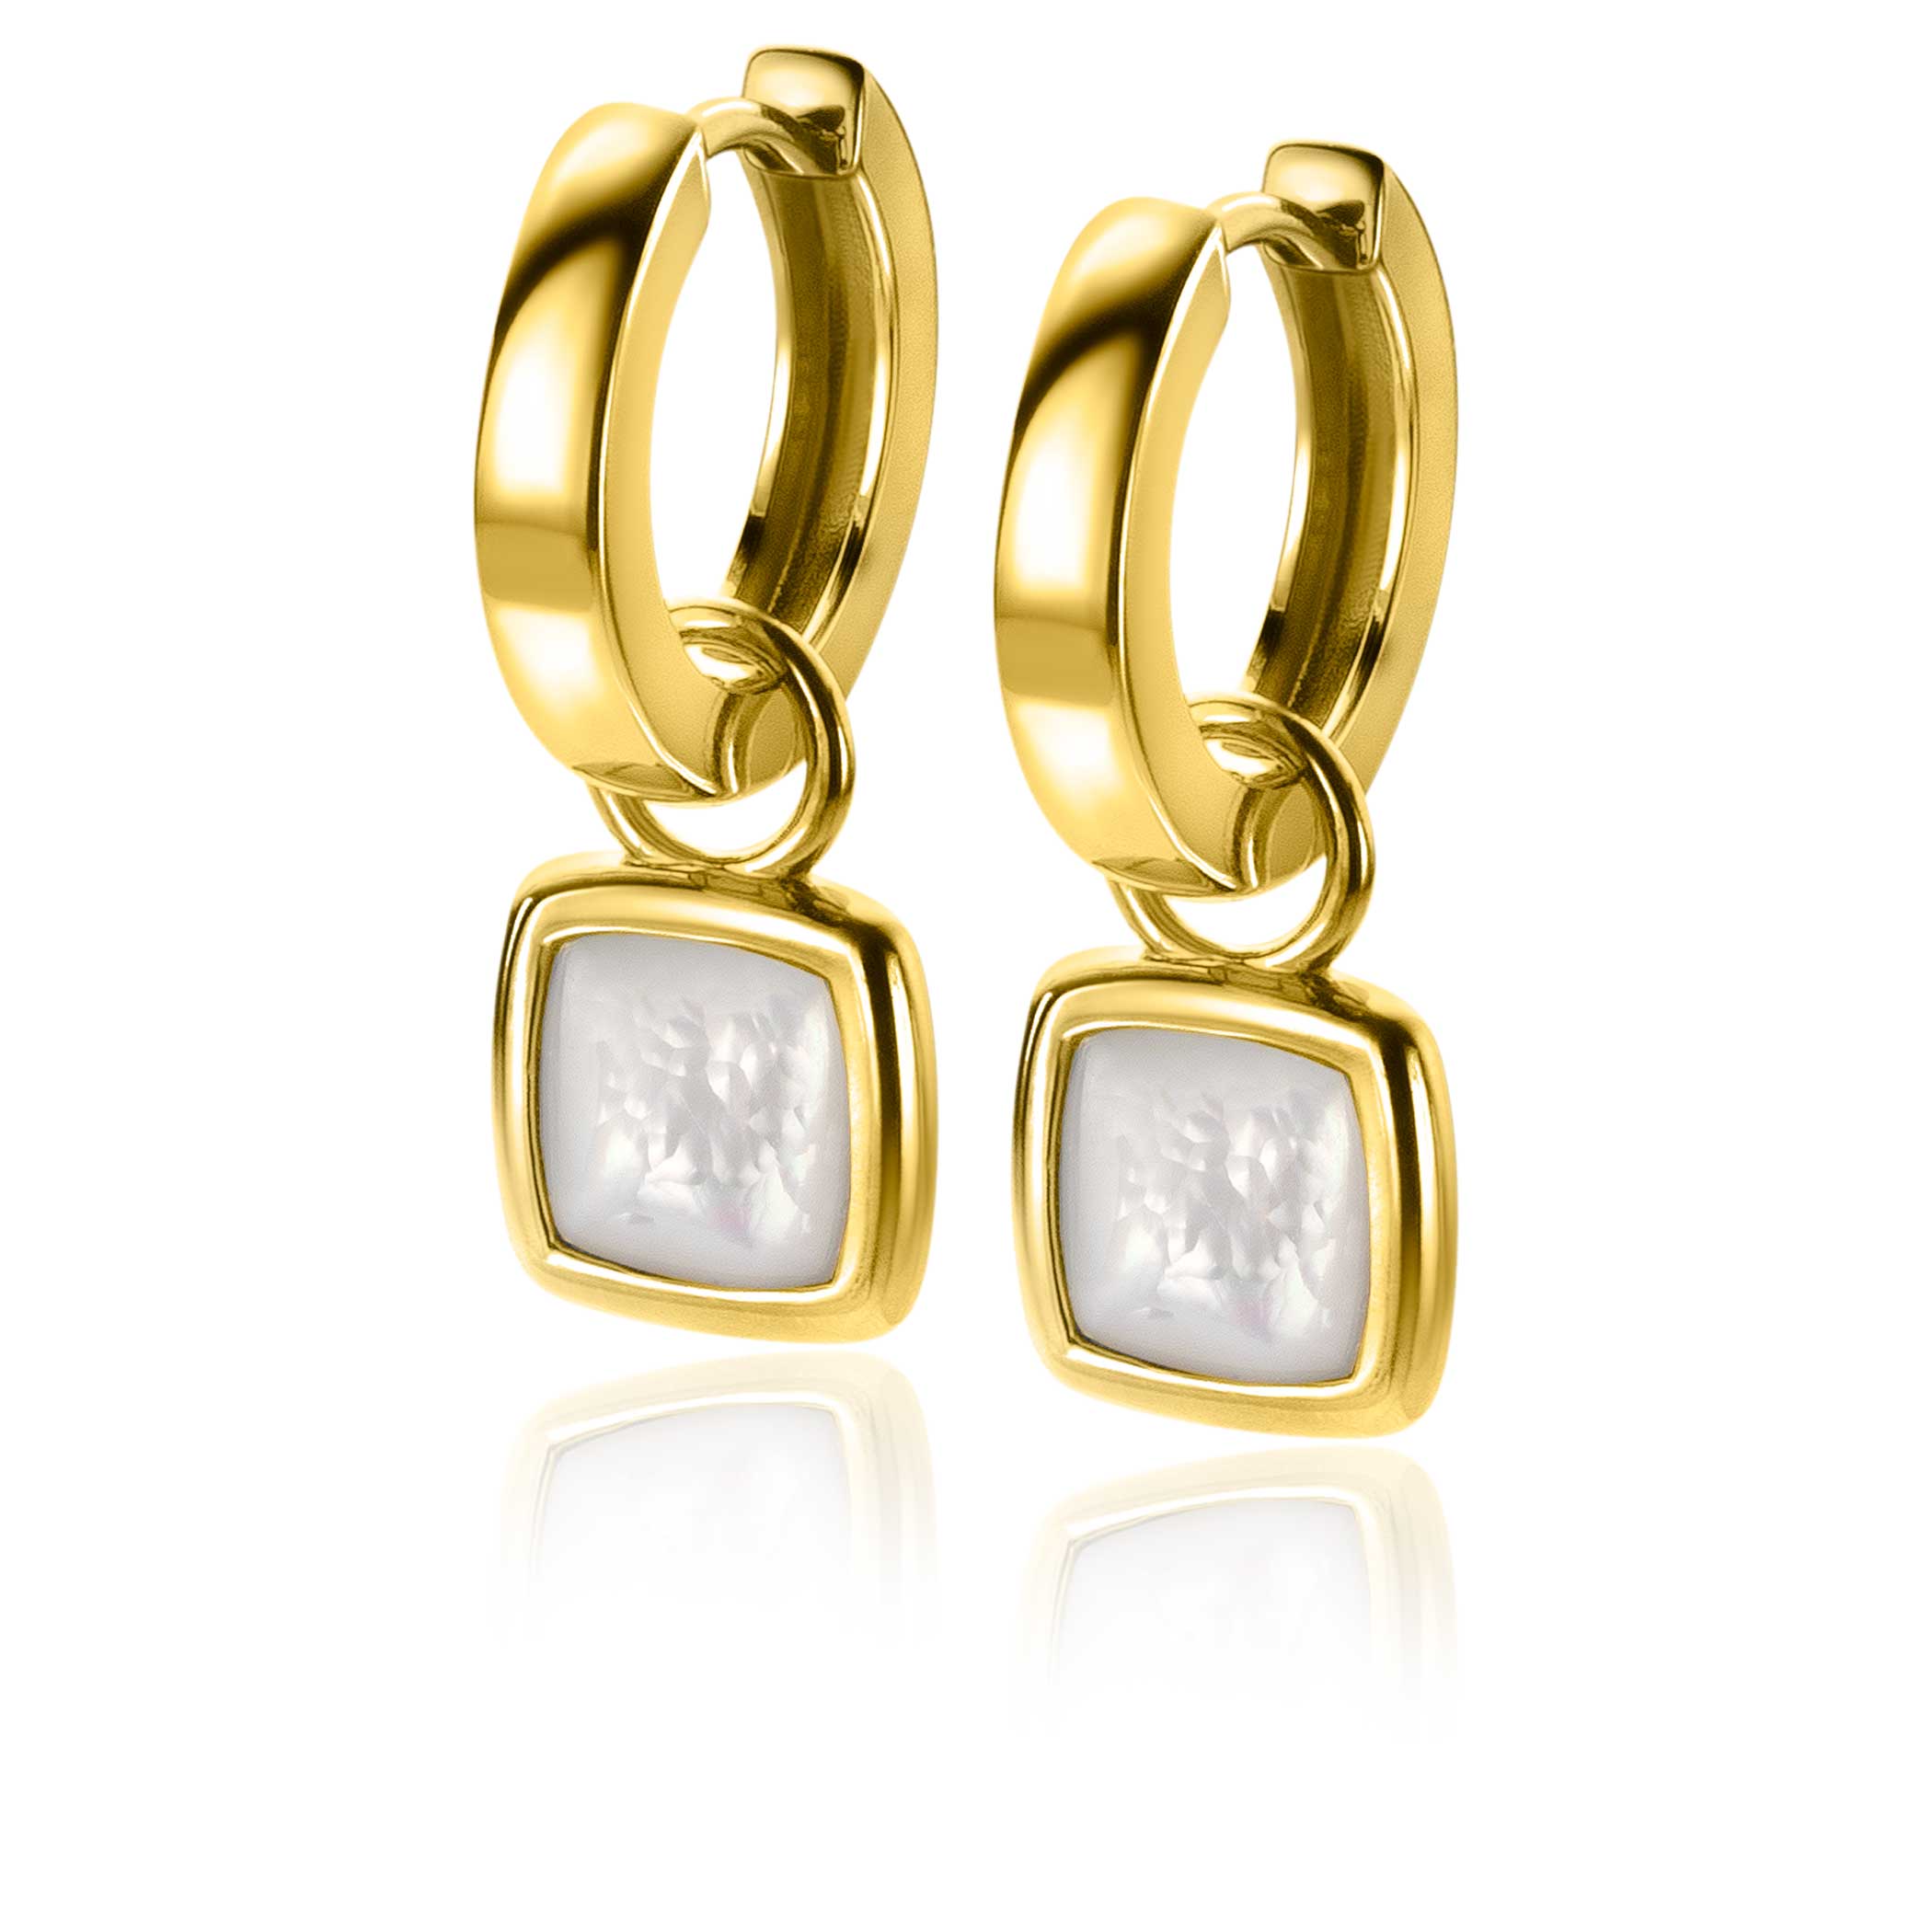 10mm ZINZI Gold Plated Sterling Silver Earrings Pendants Square Two-sided Black Onyx and White Mother-of-Pearl ZICH2257G (excl. hoop earrings)